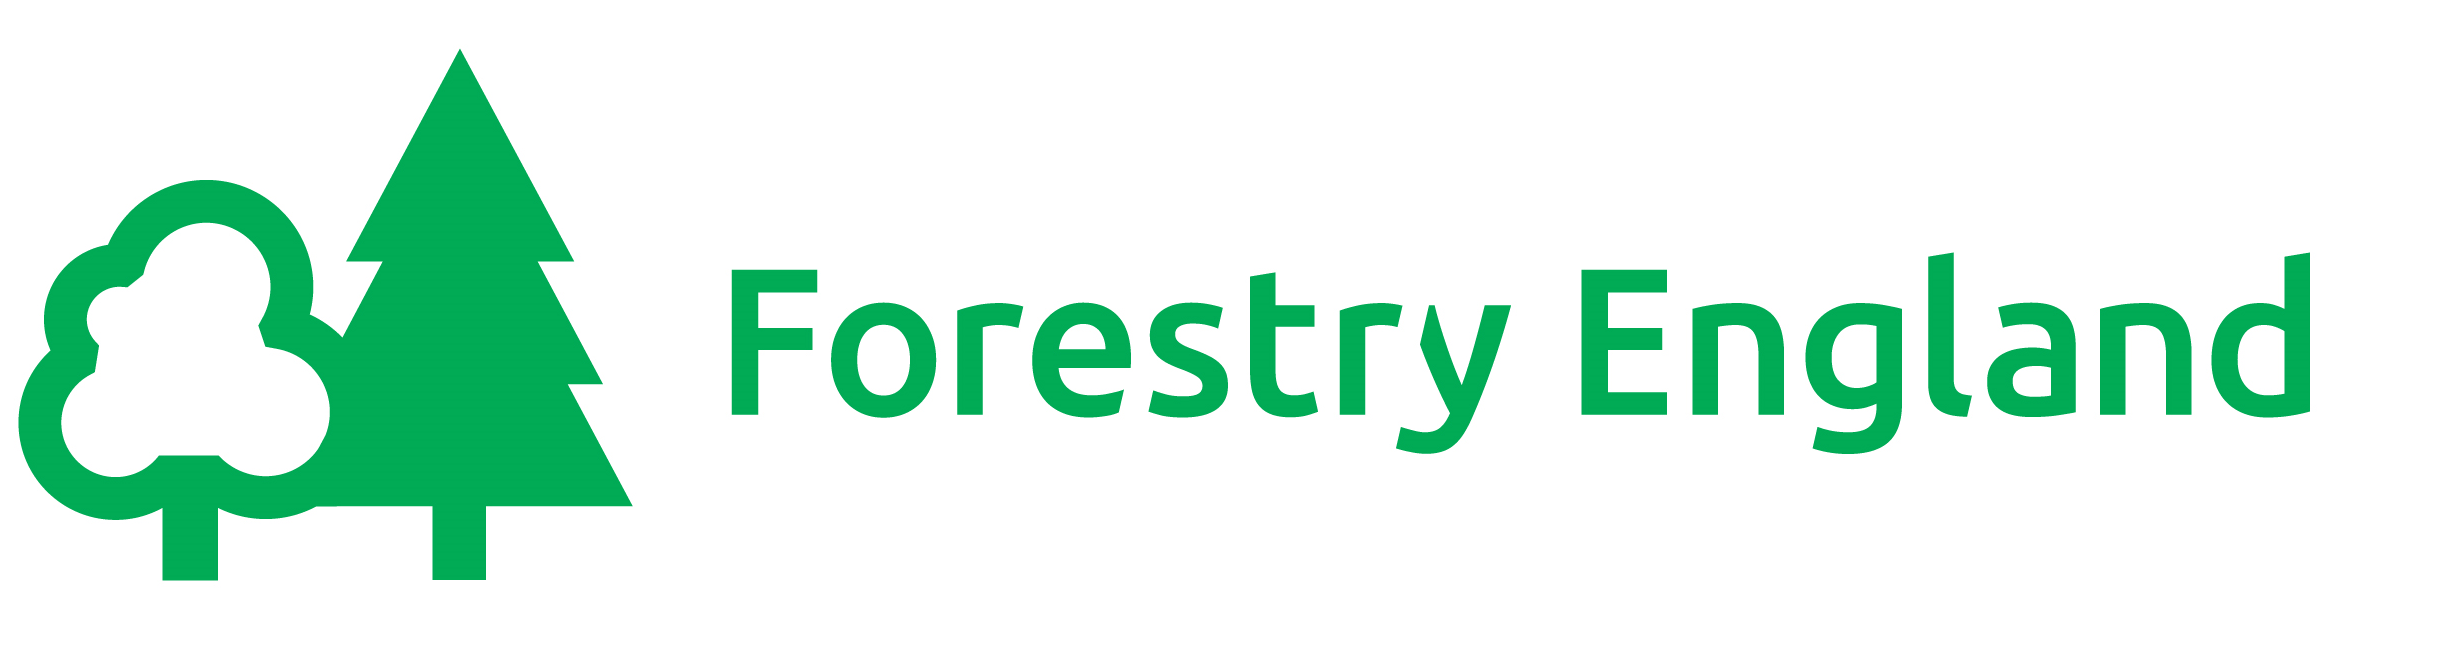 Forestry England Online Tickets